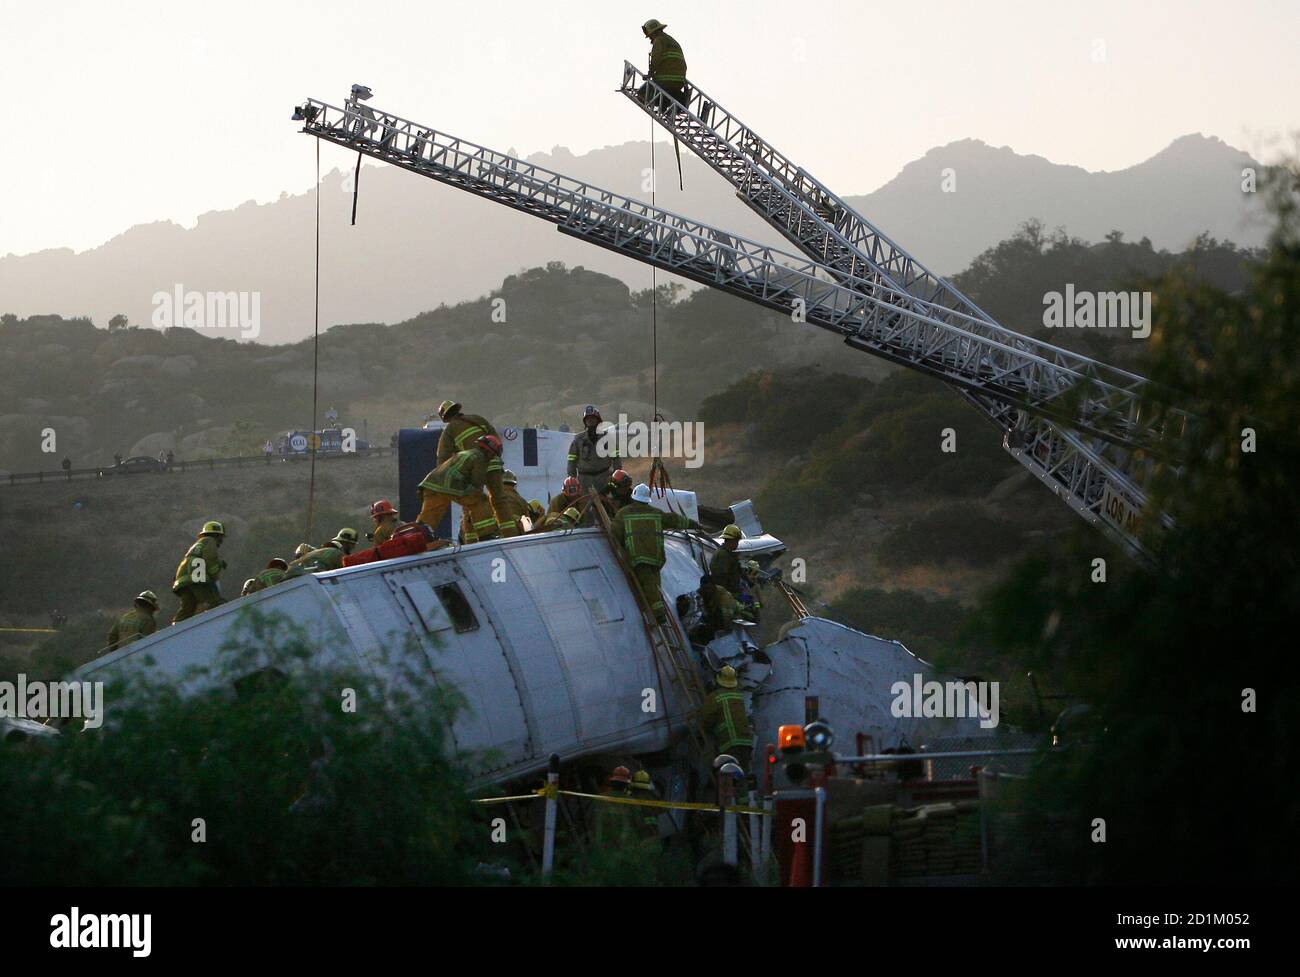 Firefighters work to rescue victim after a Metrolink commuter train en route from Los Angeles' Union Station to Oxnard collided with a freight train in the Chatsworth area, September 12, 2008. Over 300 firefighters are working to douse flames and rescue victims, according to the Los Angeles Fire Department.  REUTERS/Gus Ruelas (UNITED STATES) Stock Photo